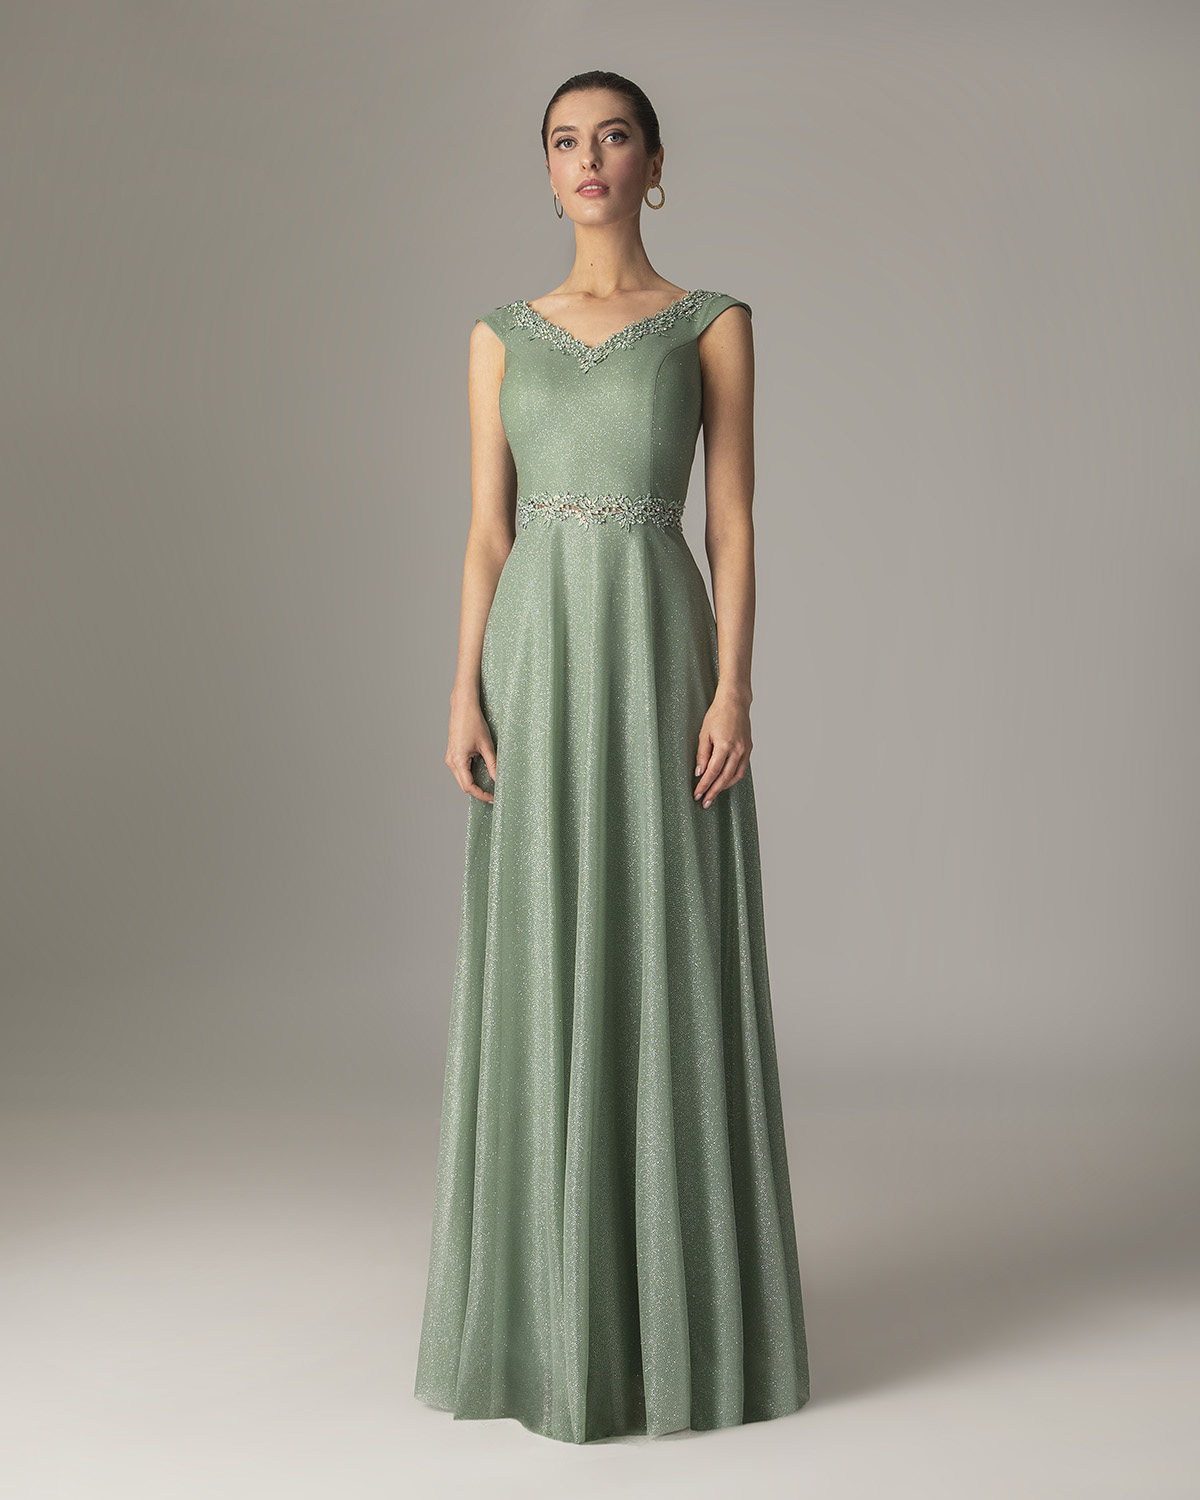 Cocktail Dresses / Long dress with shining fabric and beading on the waist and the top